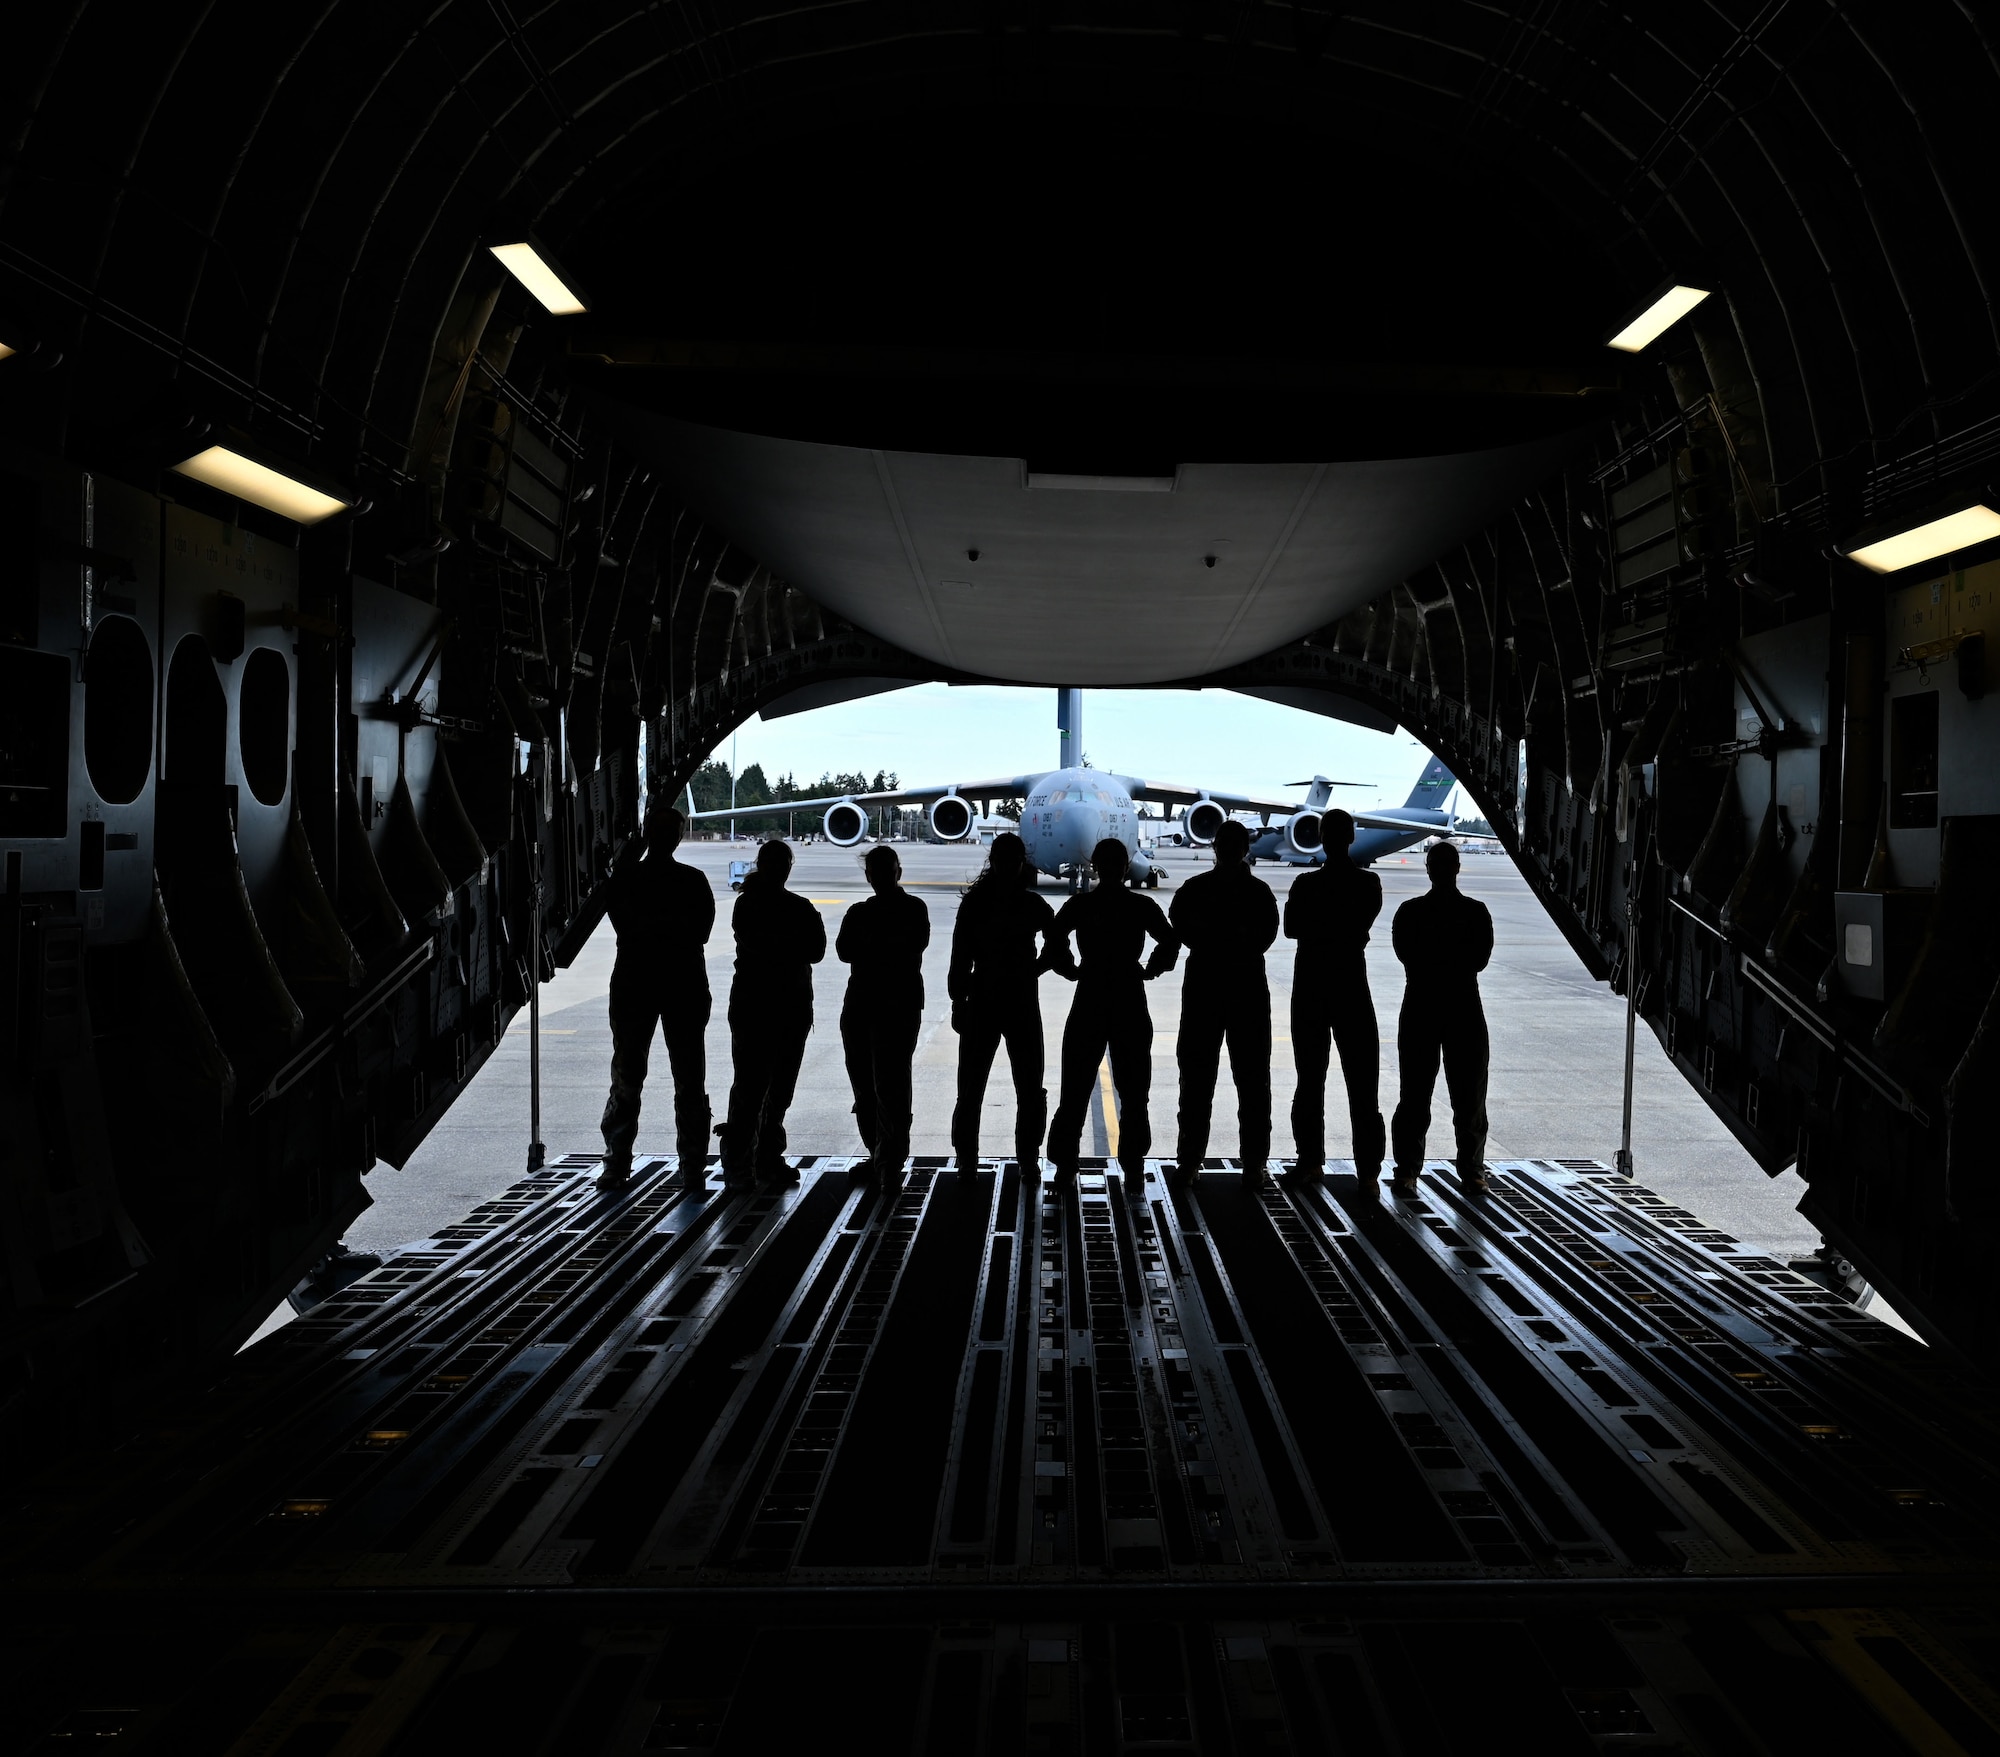 A group of 8 female pilots and loadmasters pose on the ramp of a C-17 Globemaster as it is parked in front of another C-17.